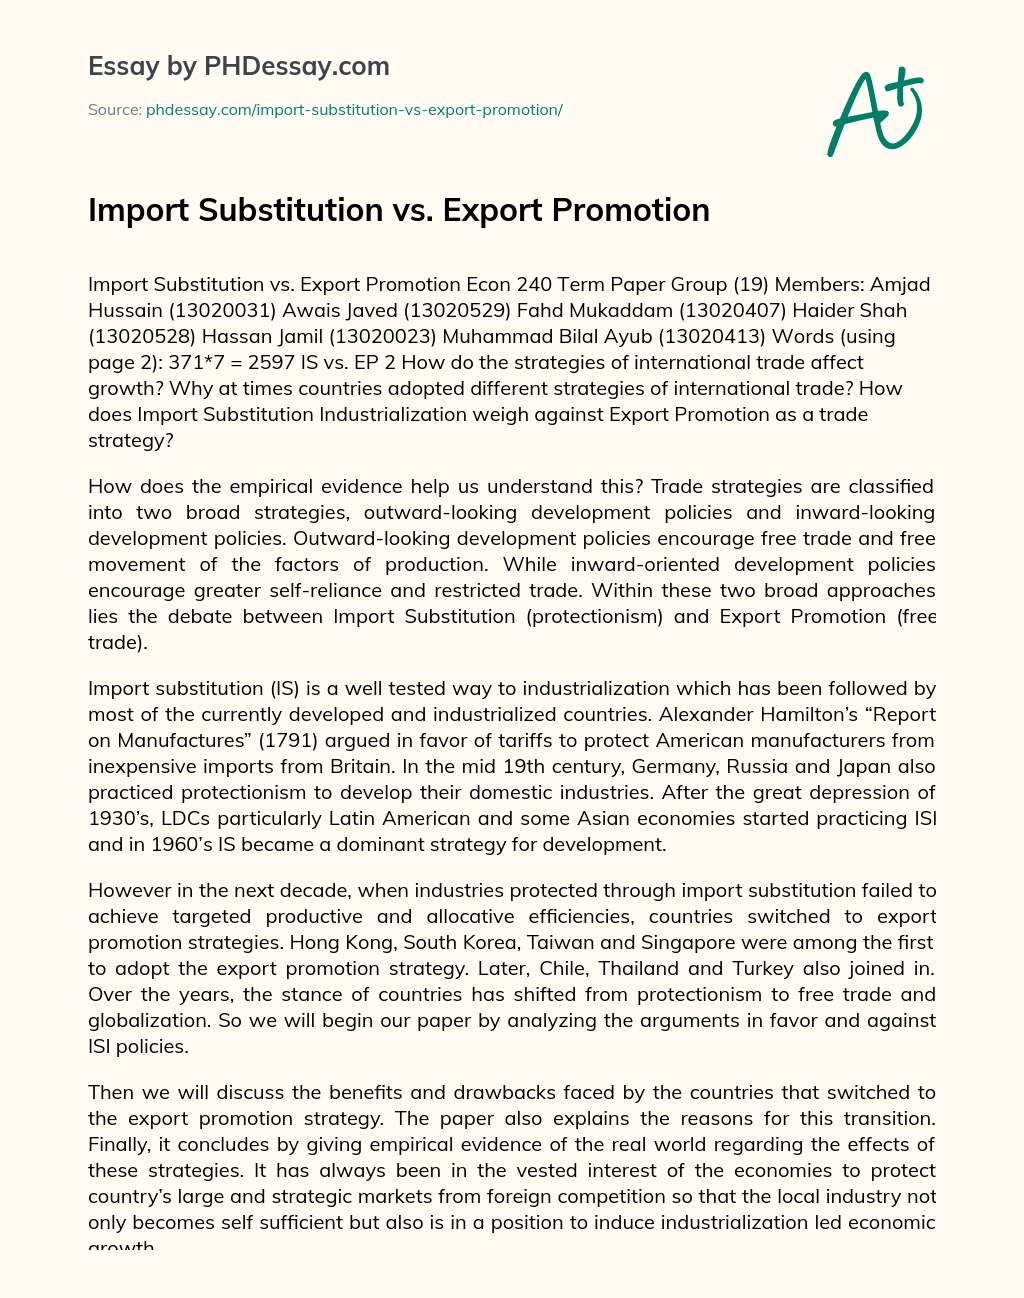 Import Substitution vs. Export Promotion essay